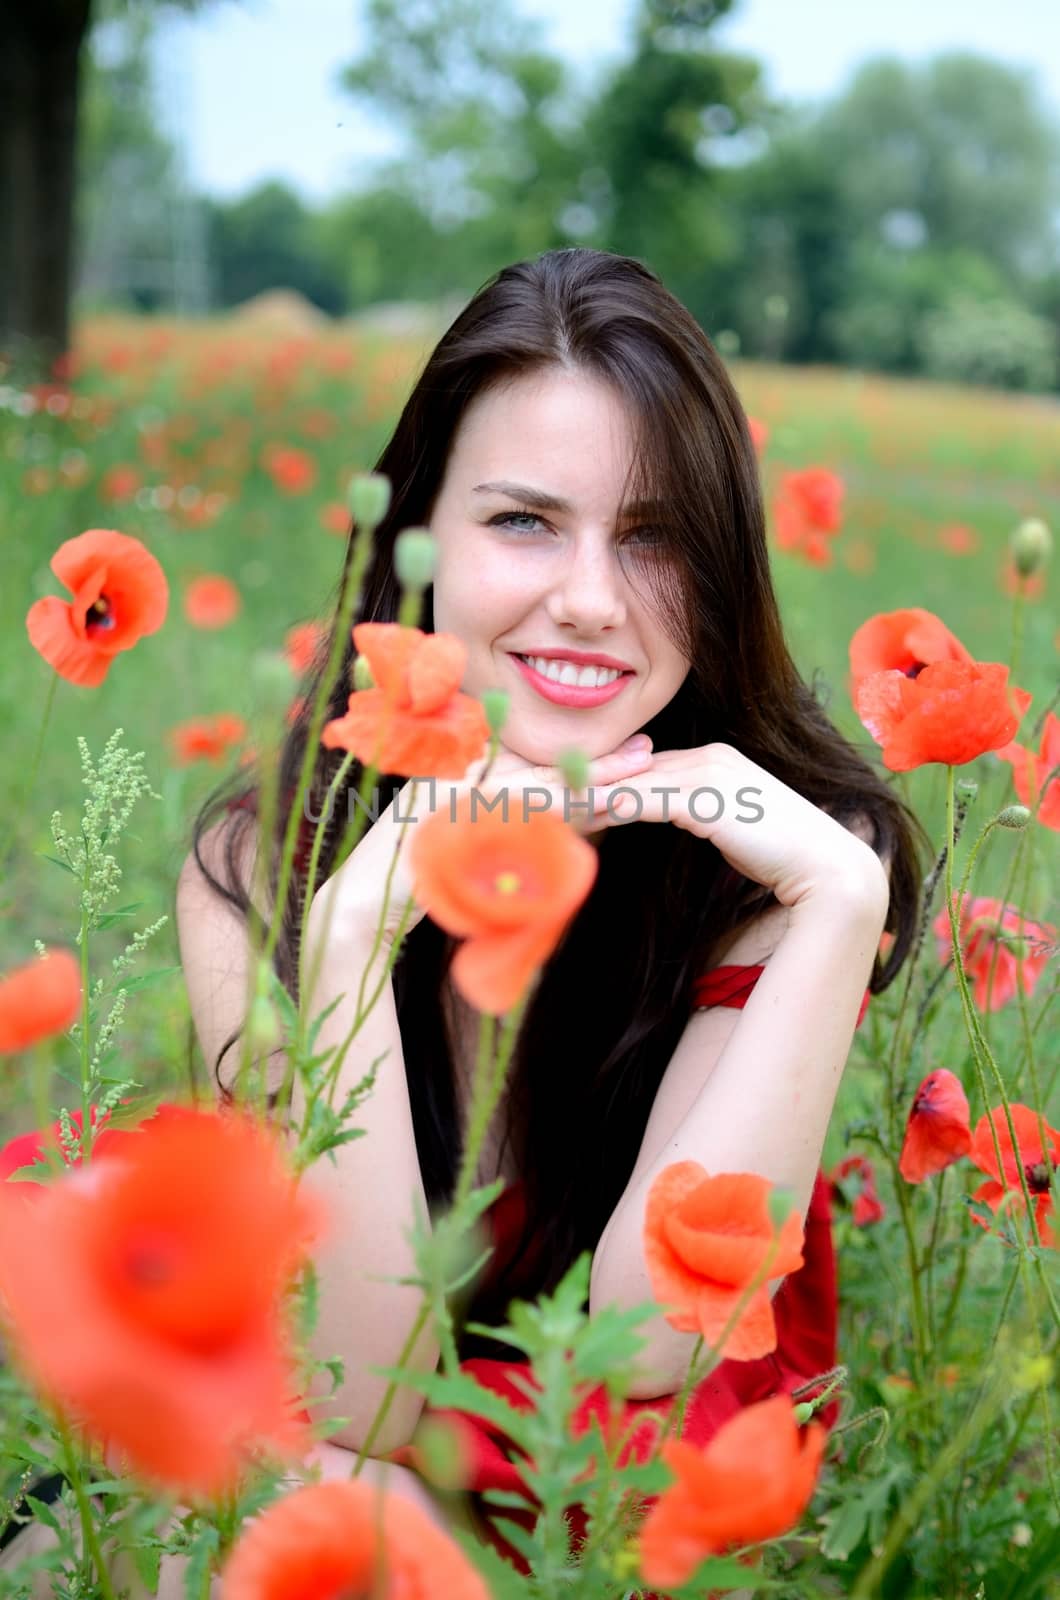 Smiling girl with poppies by bartekchiny